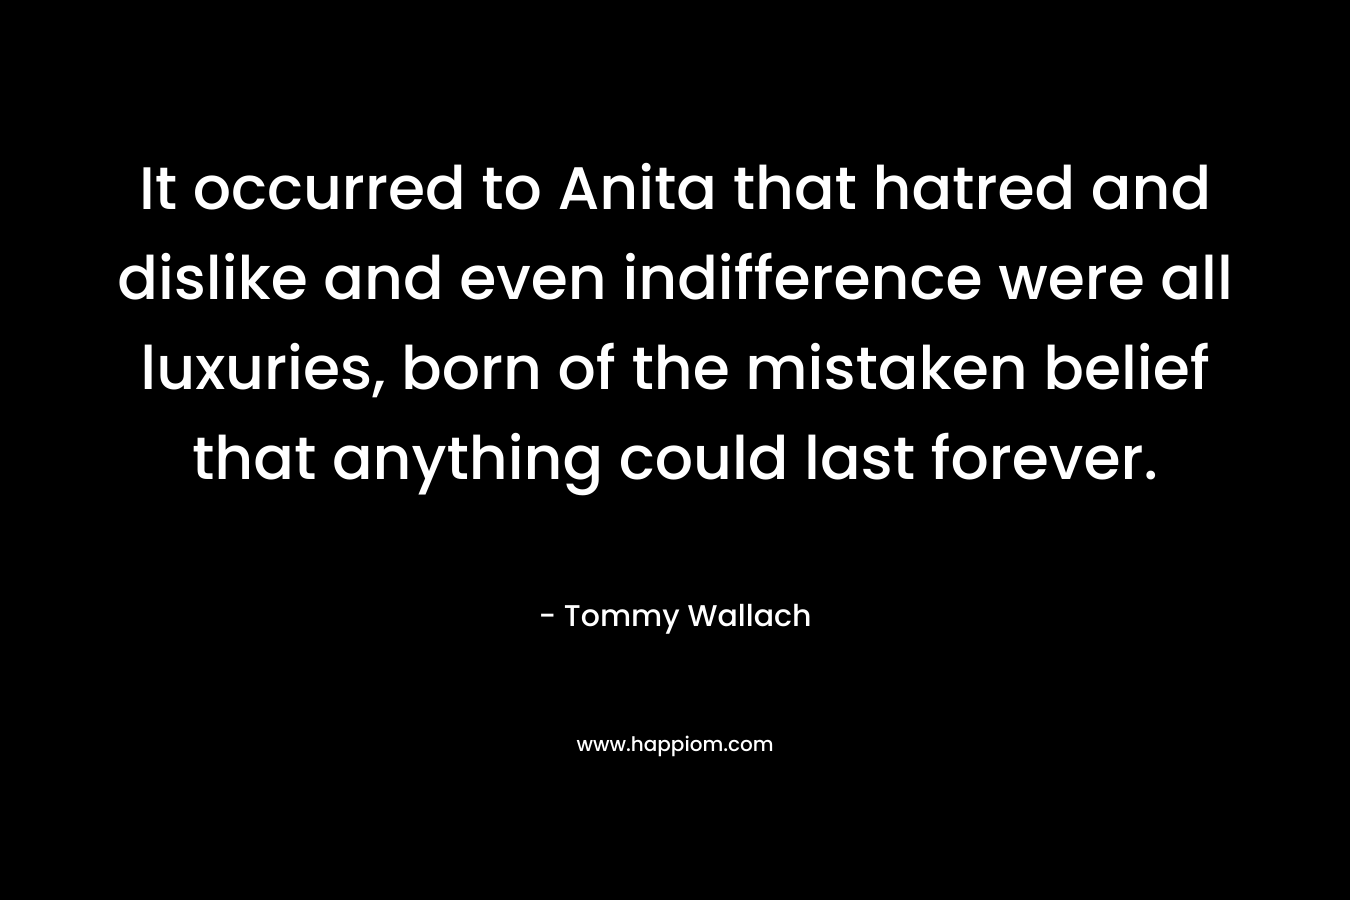 It occurred to Anita that hatred and dislike and even indifference were all luxuries, born of the mistaken belief that anything could last forever. – Tommy Wallach